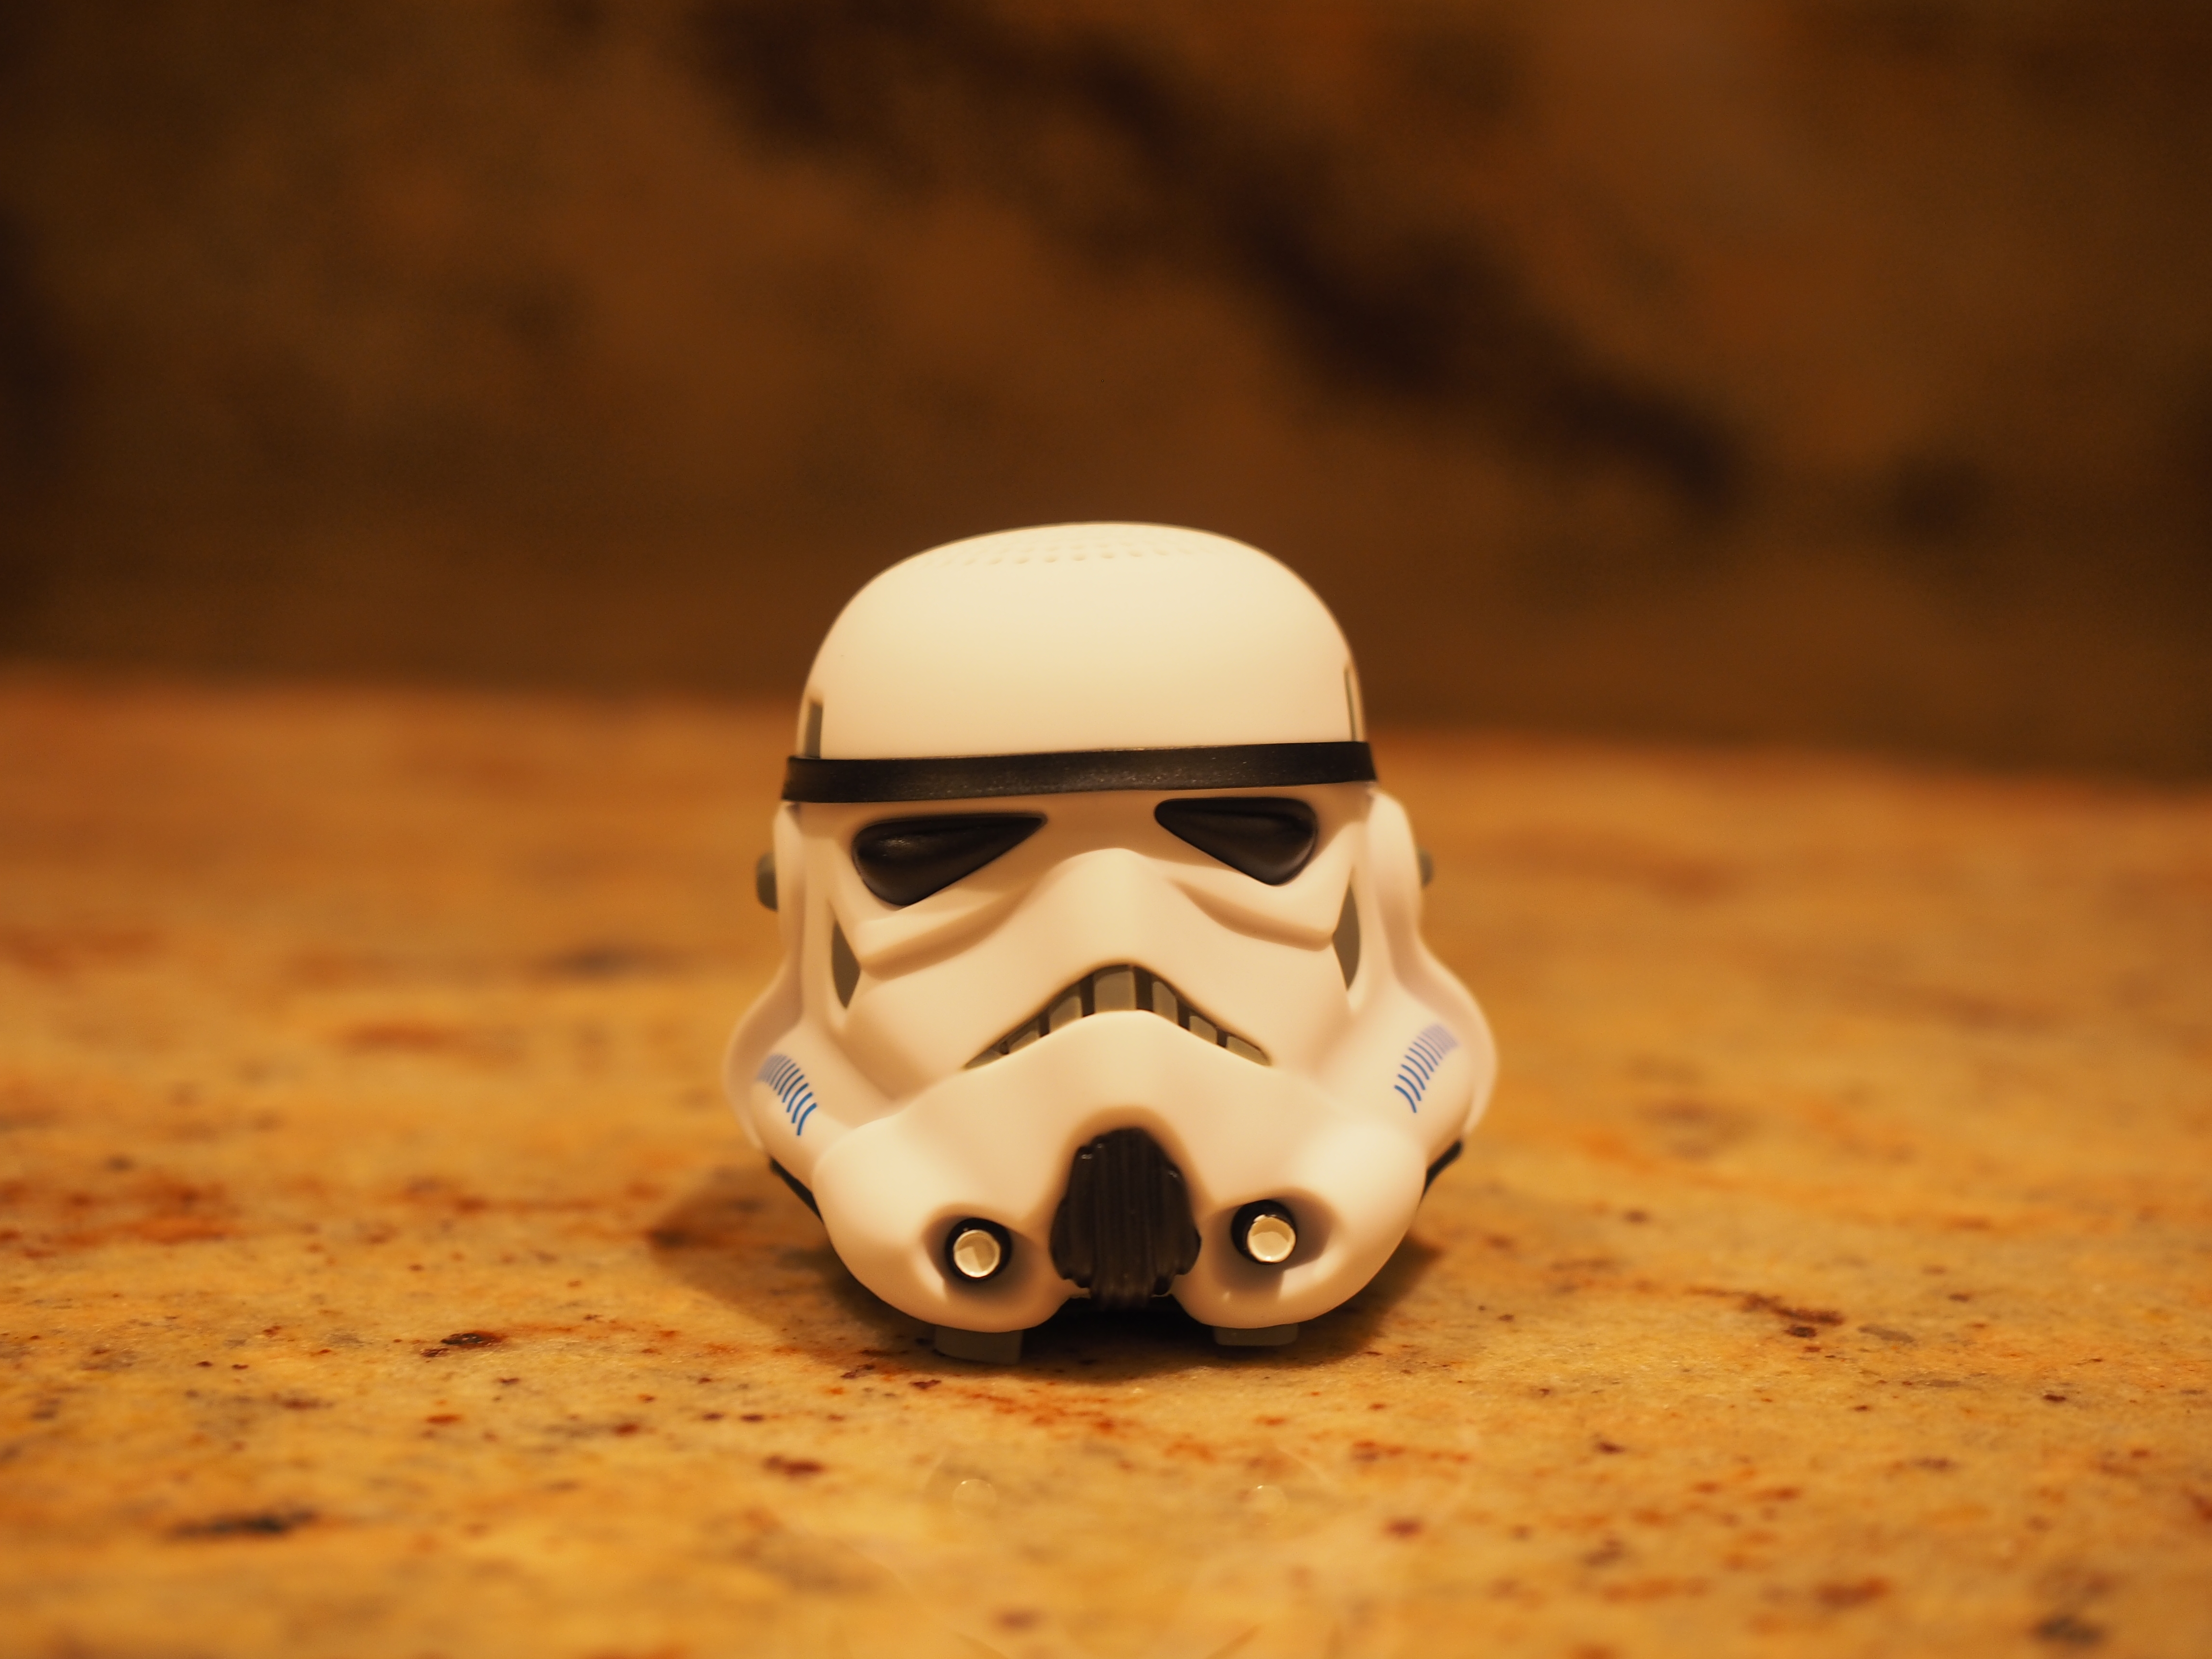 Hear the Force with the Thumbs Up Storm Trooper Speaker